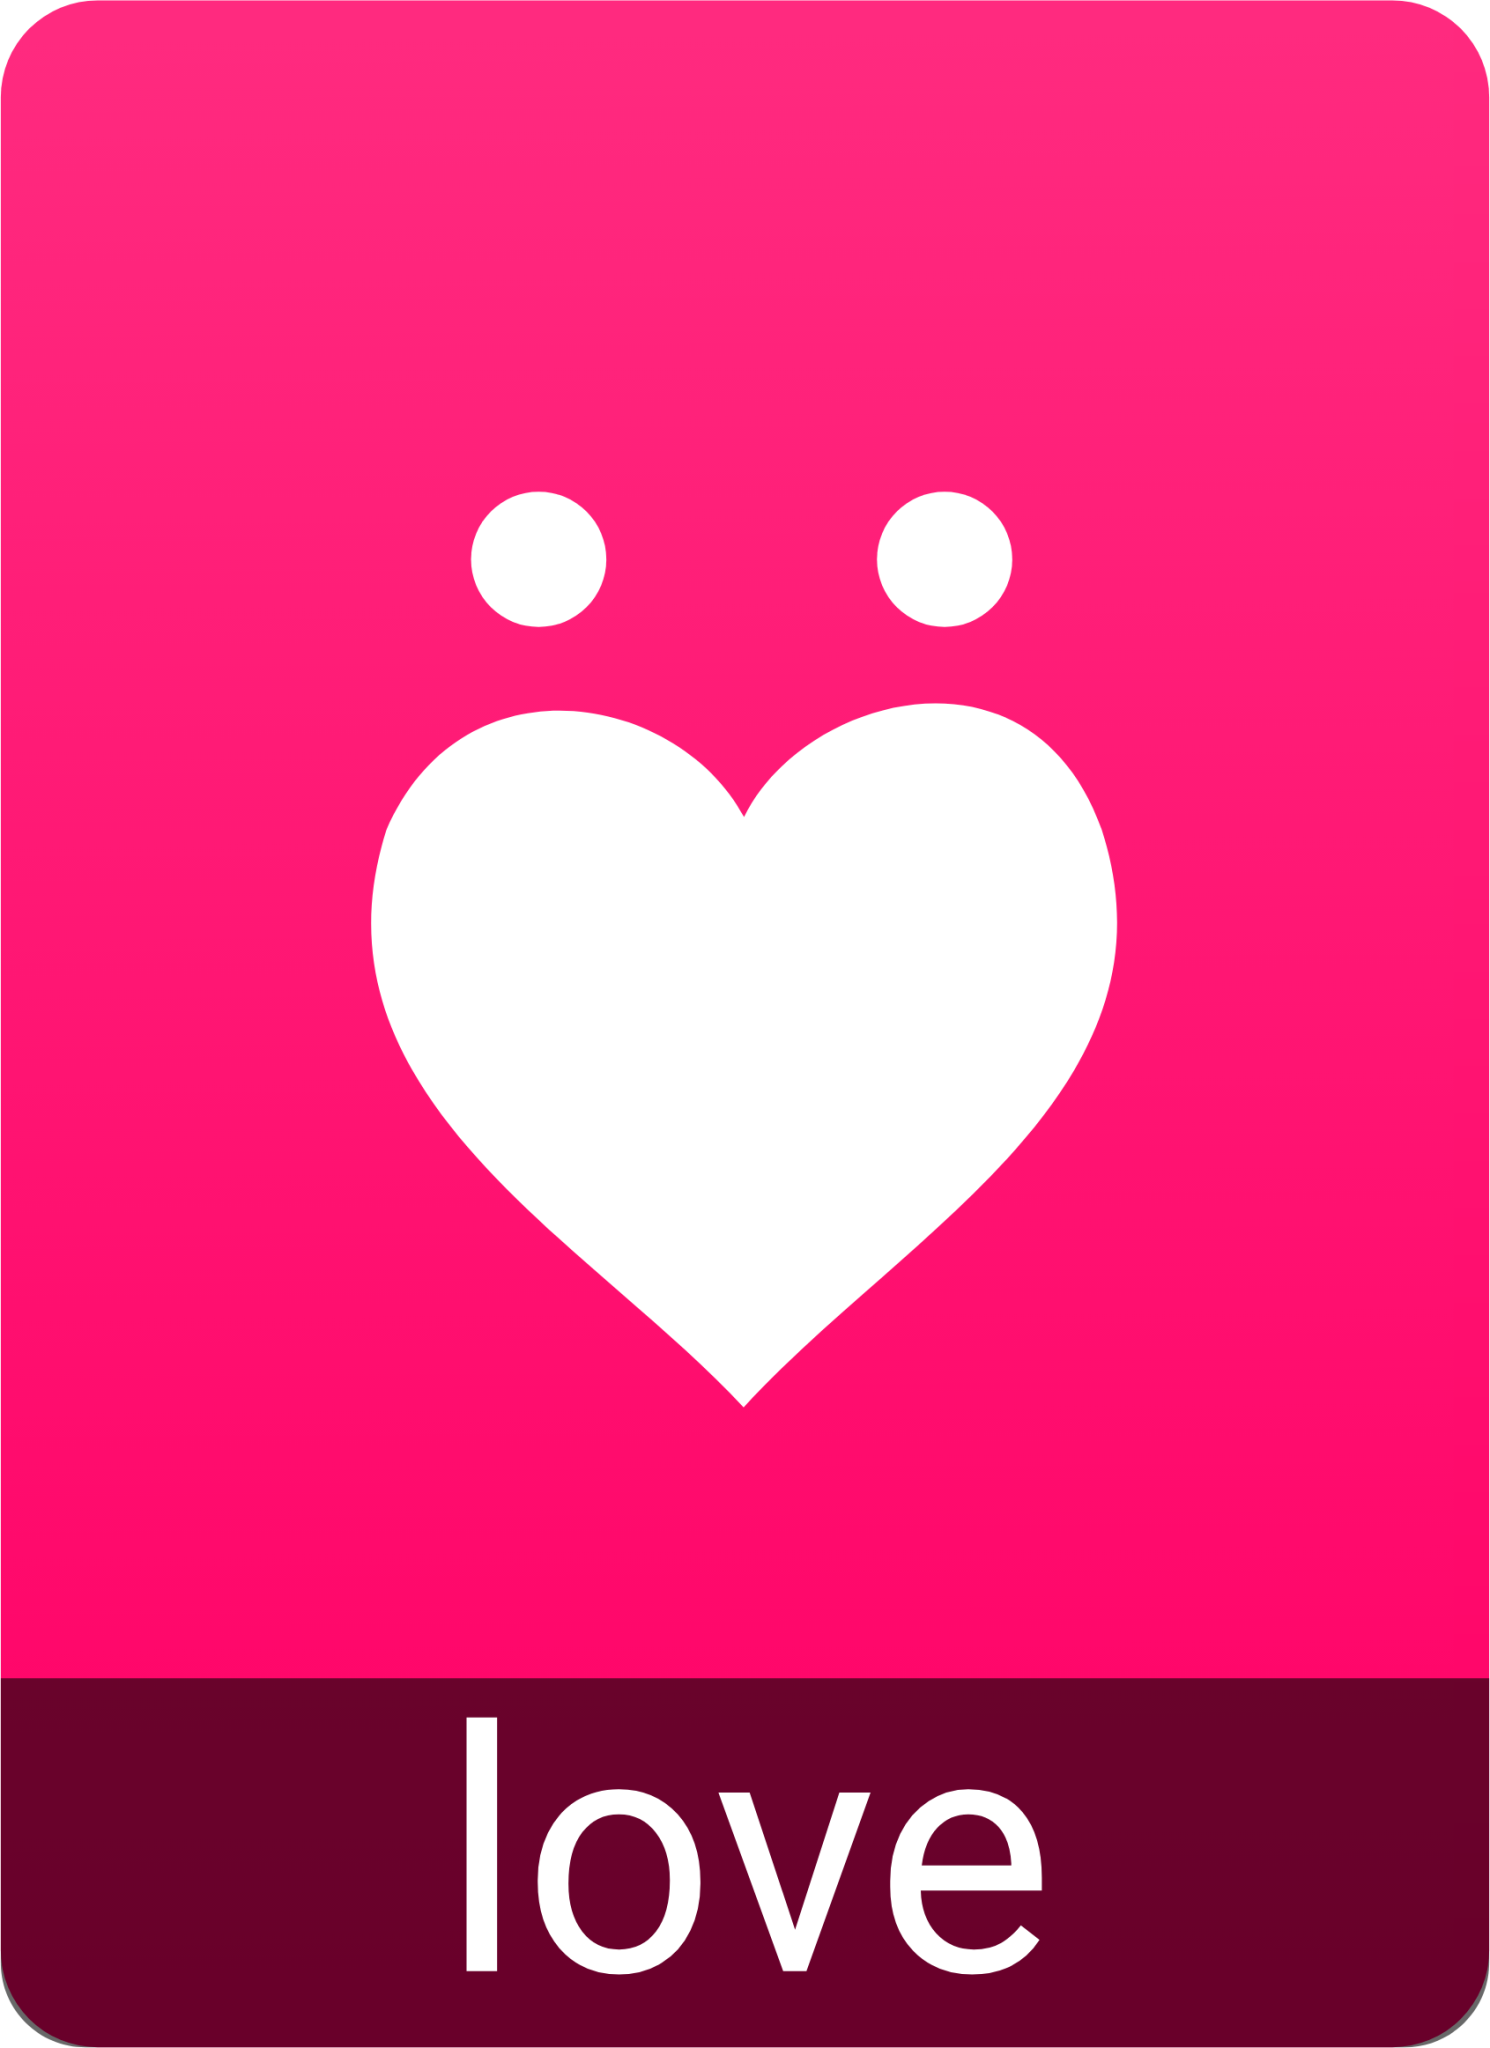 application x love game icon